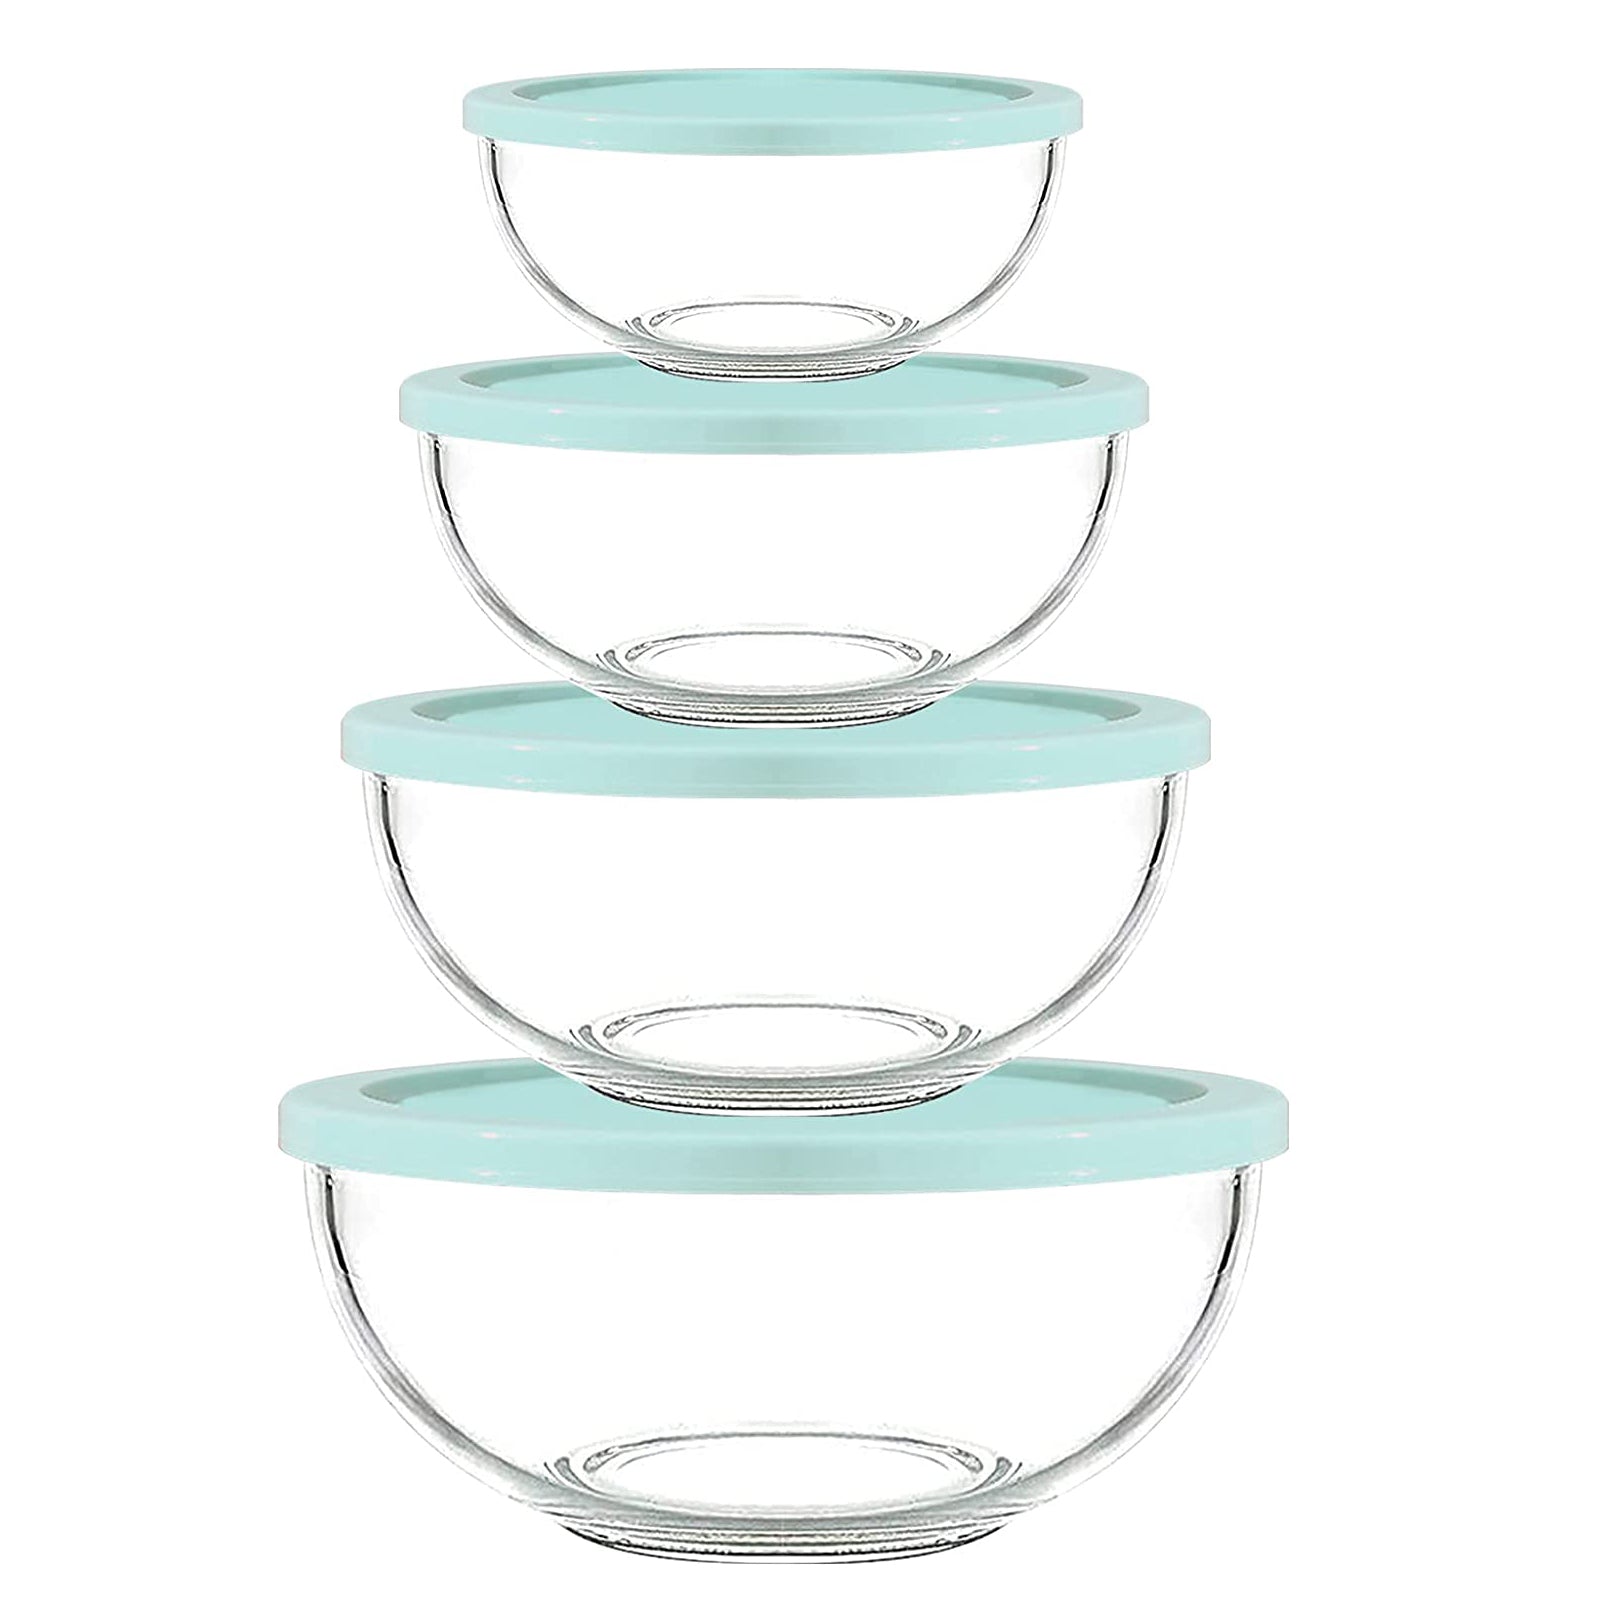 Superior Glass Mixing Bowls with Lids - 8 Piece Mixing Bowl Set